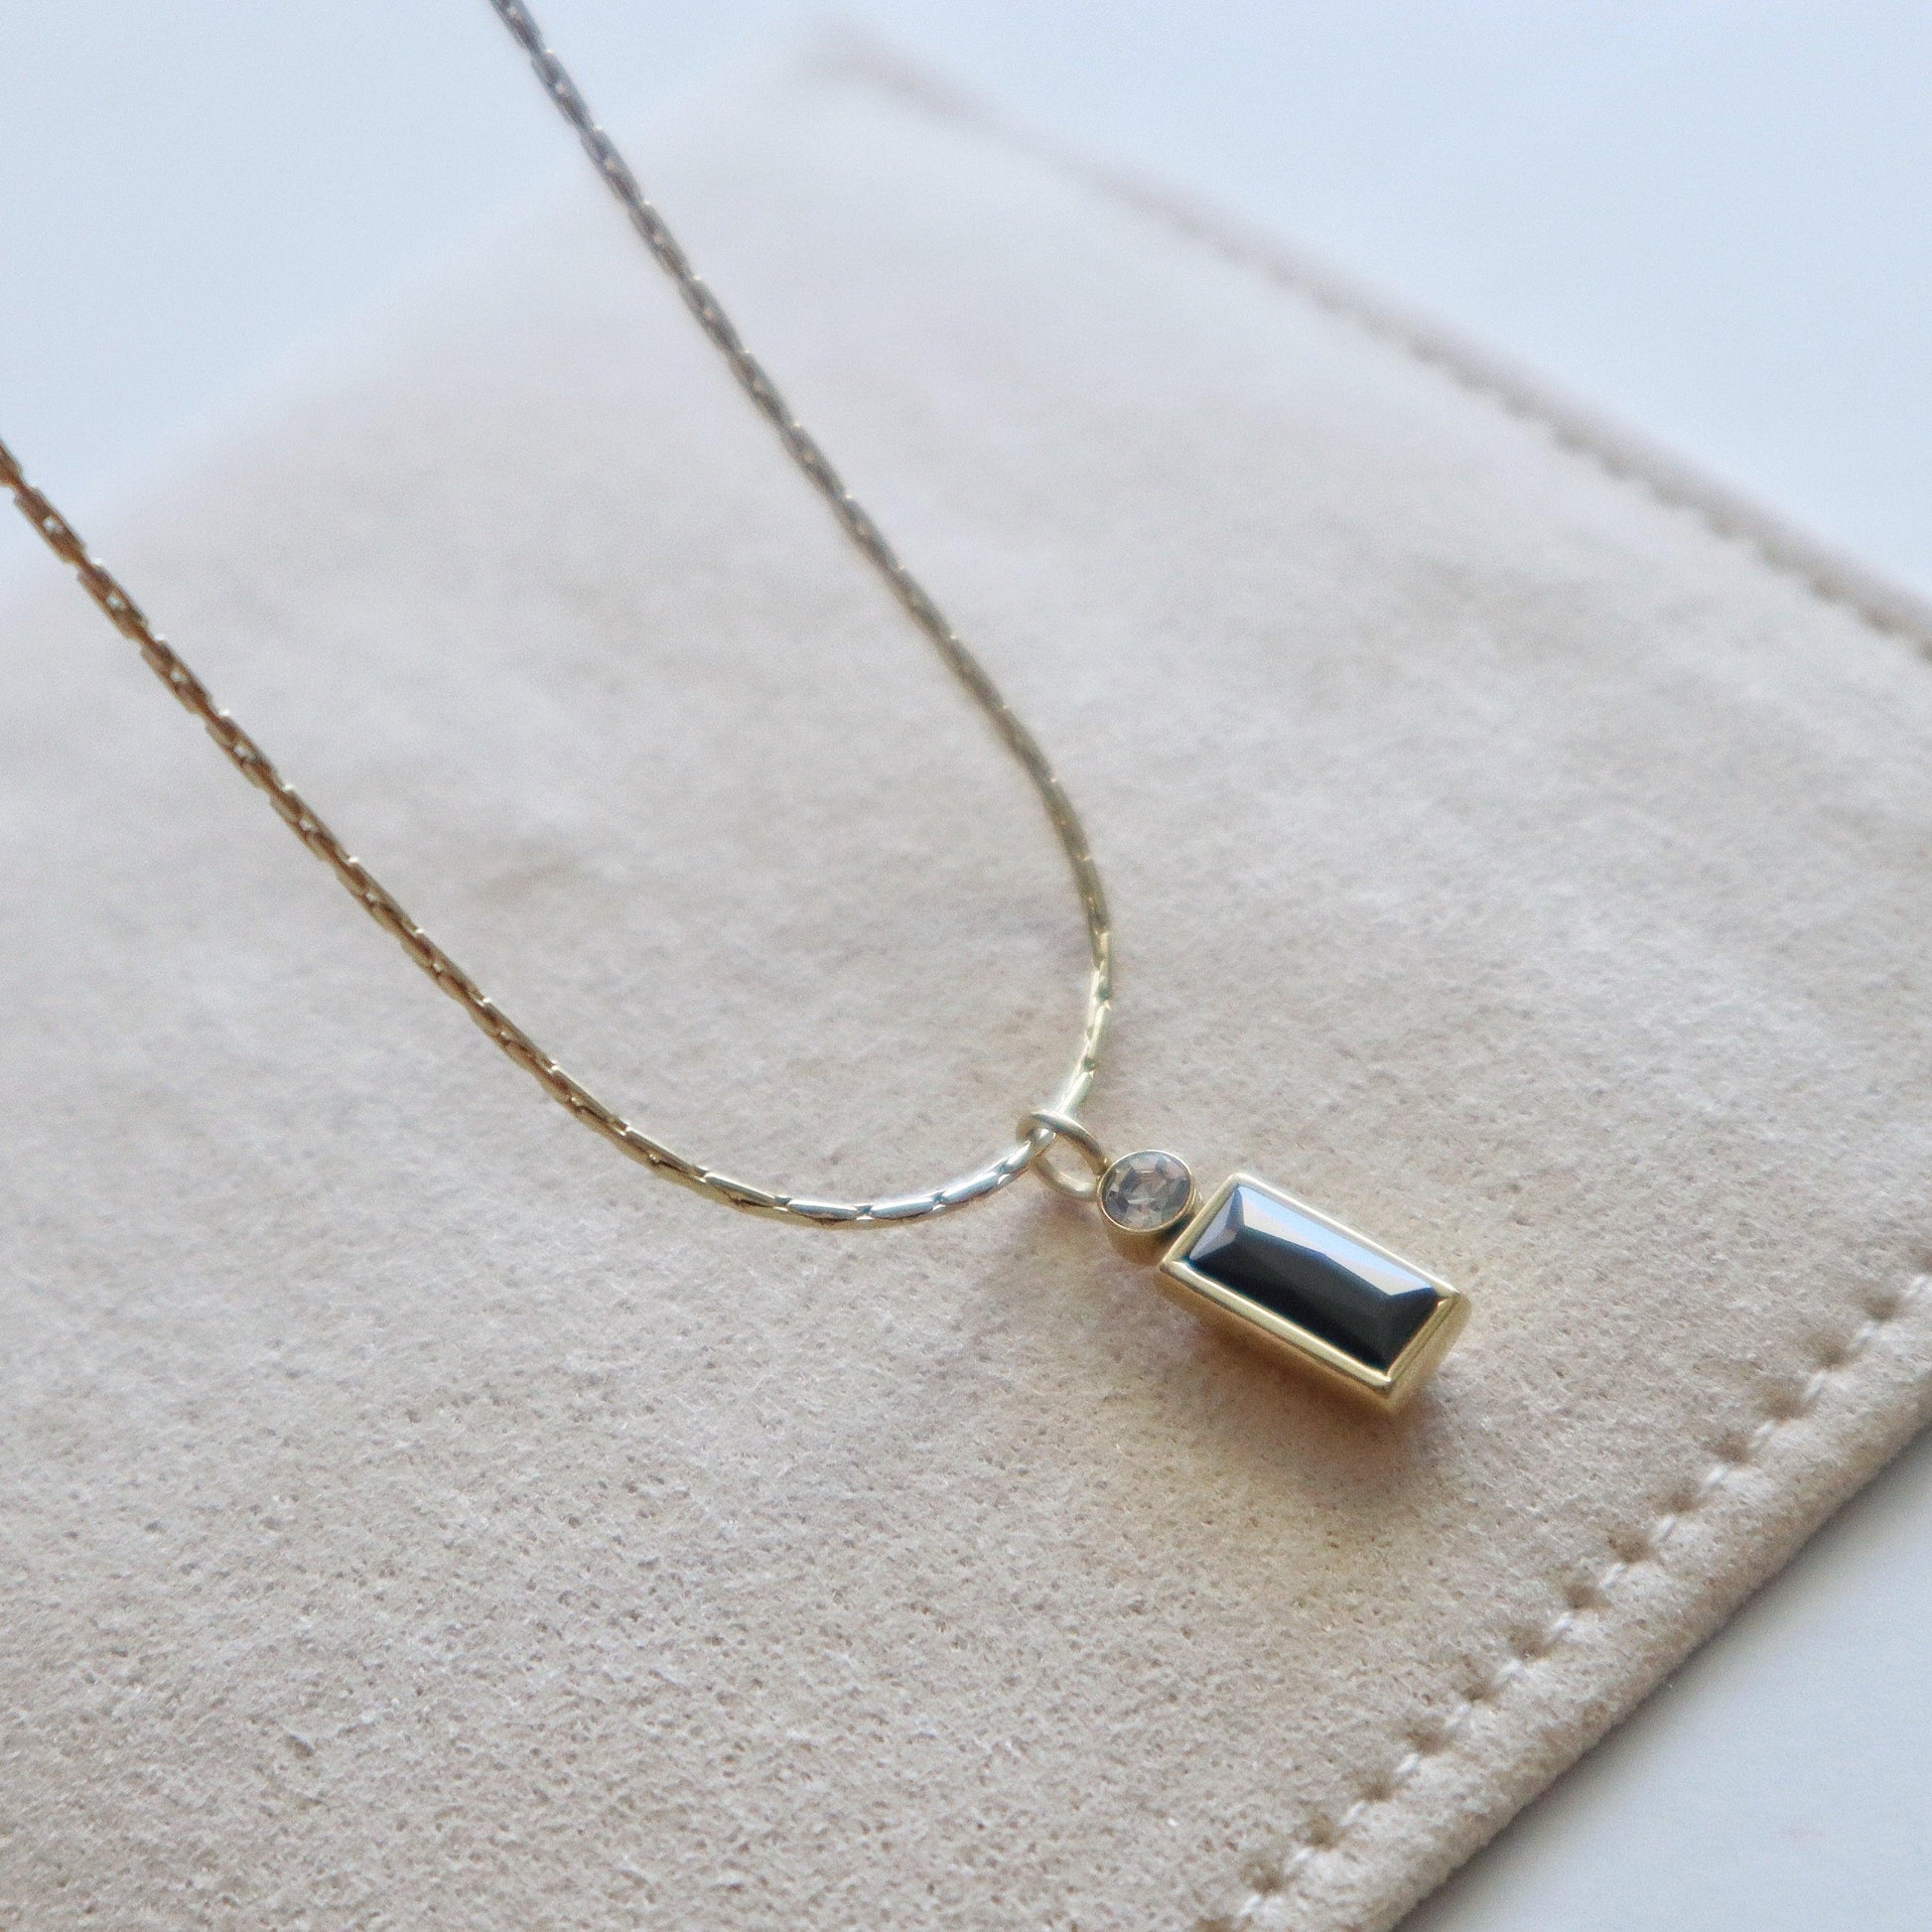 Claire Necklace | Black Gem Pendant Necklace - JESSA JEWELRY | GOLD JEWELRY; dainty, affordable gold everyday jewelry. Tarnish free, water-resistant, hypoallergenic. Jewelry for everyday wear